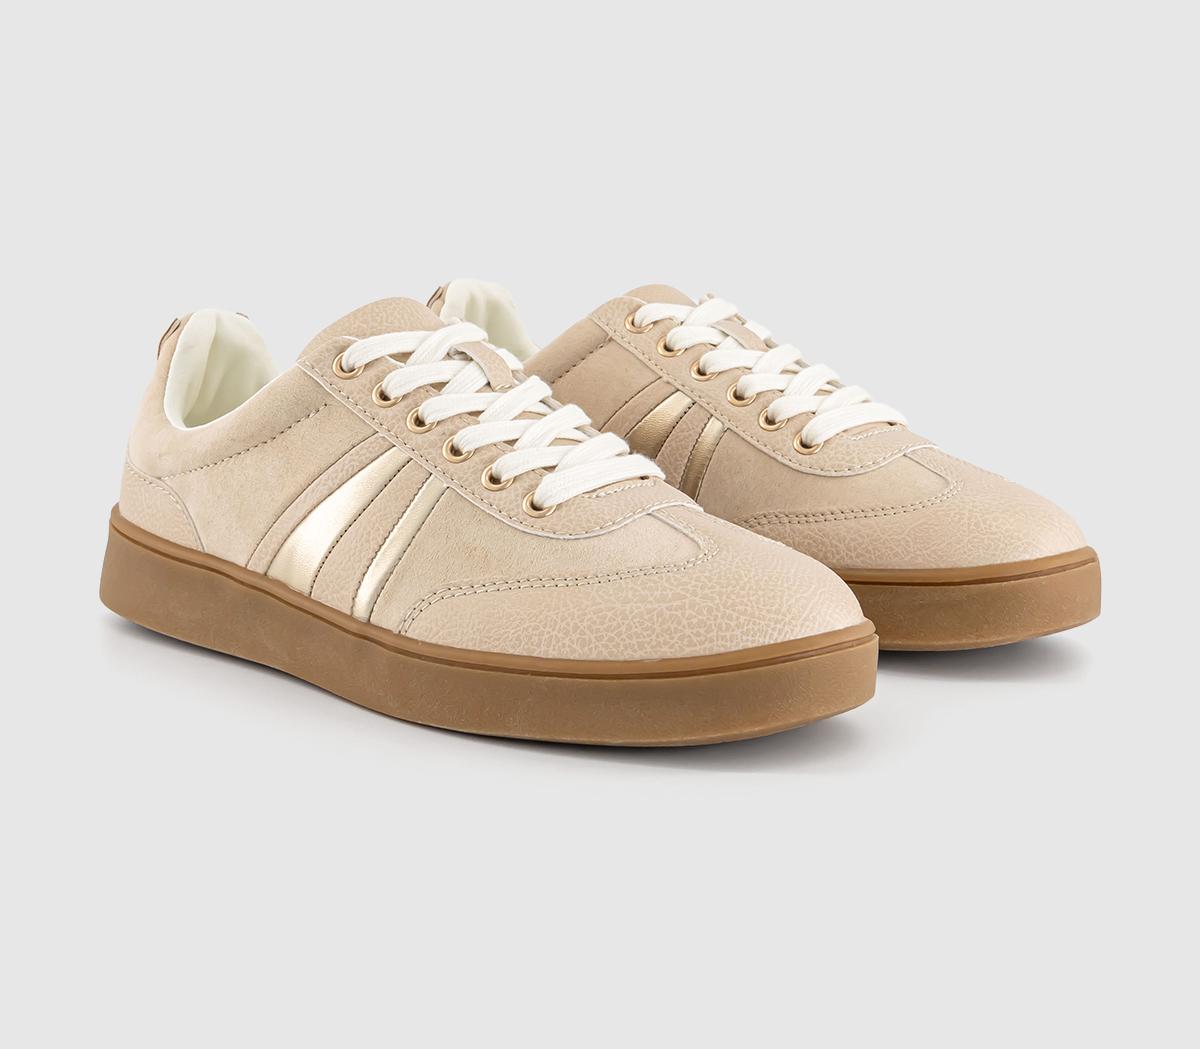 OFFICE Womens Florida Lace Up Skate Trainers Blush Gold Pink, 9